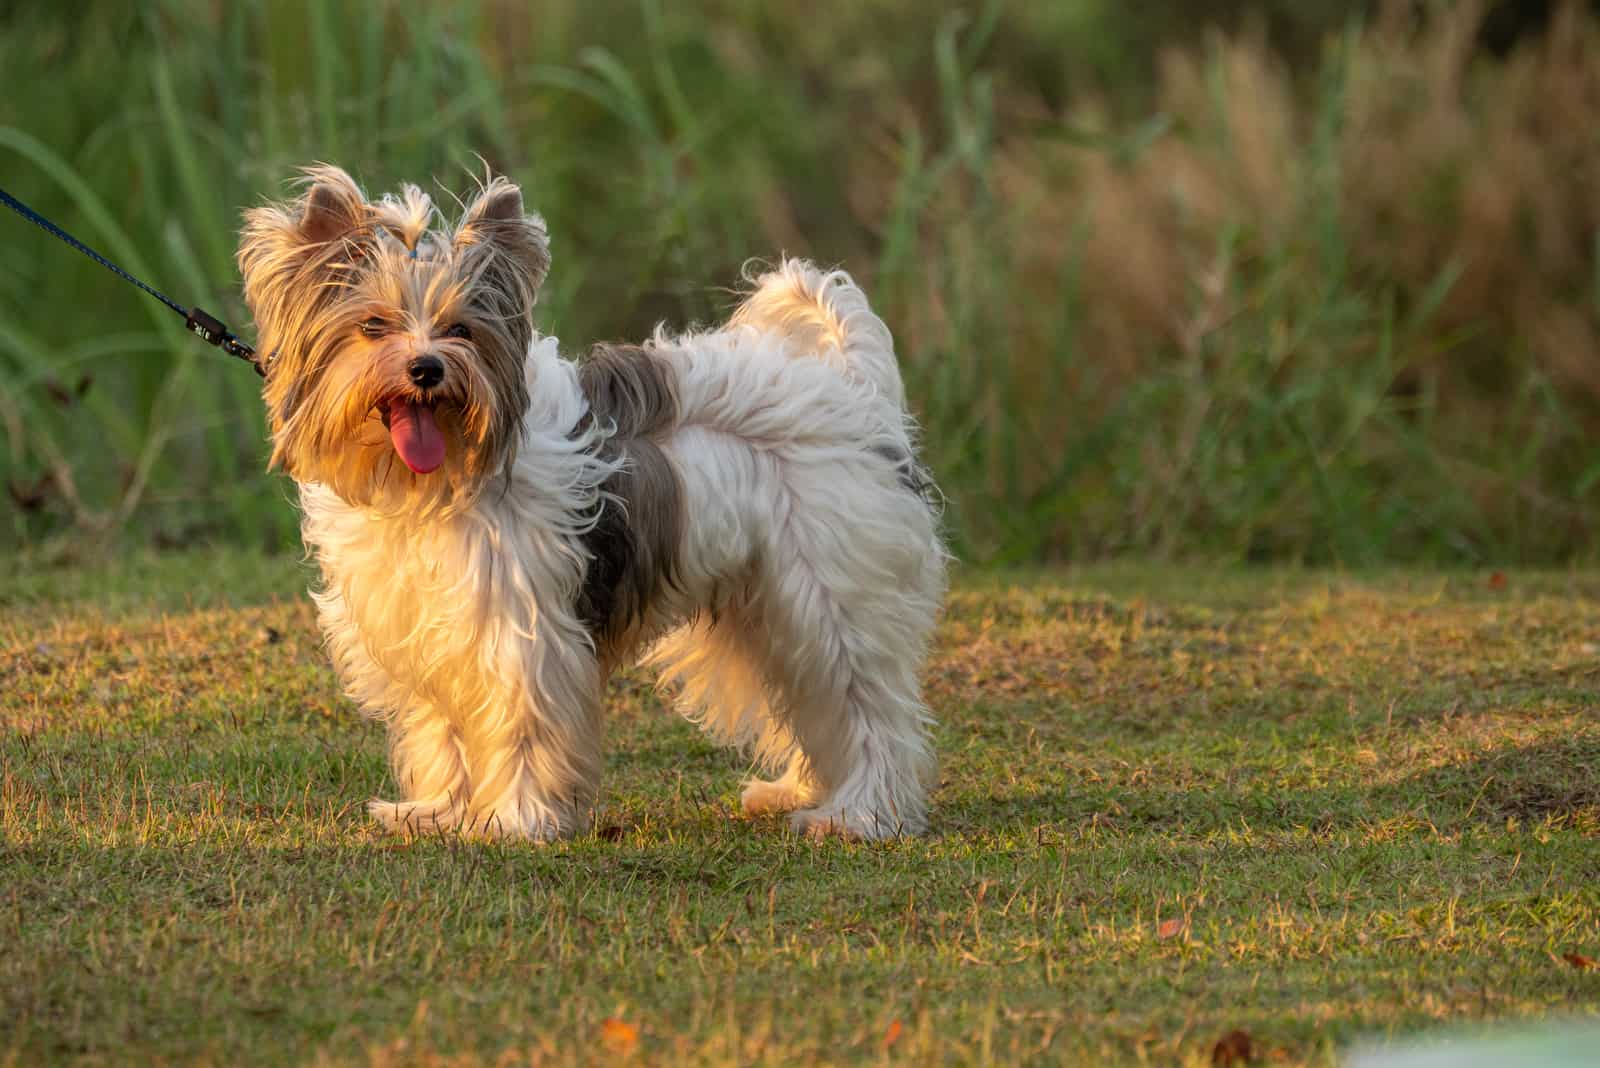 The Yorkshire Terrier stands on the grass